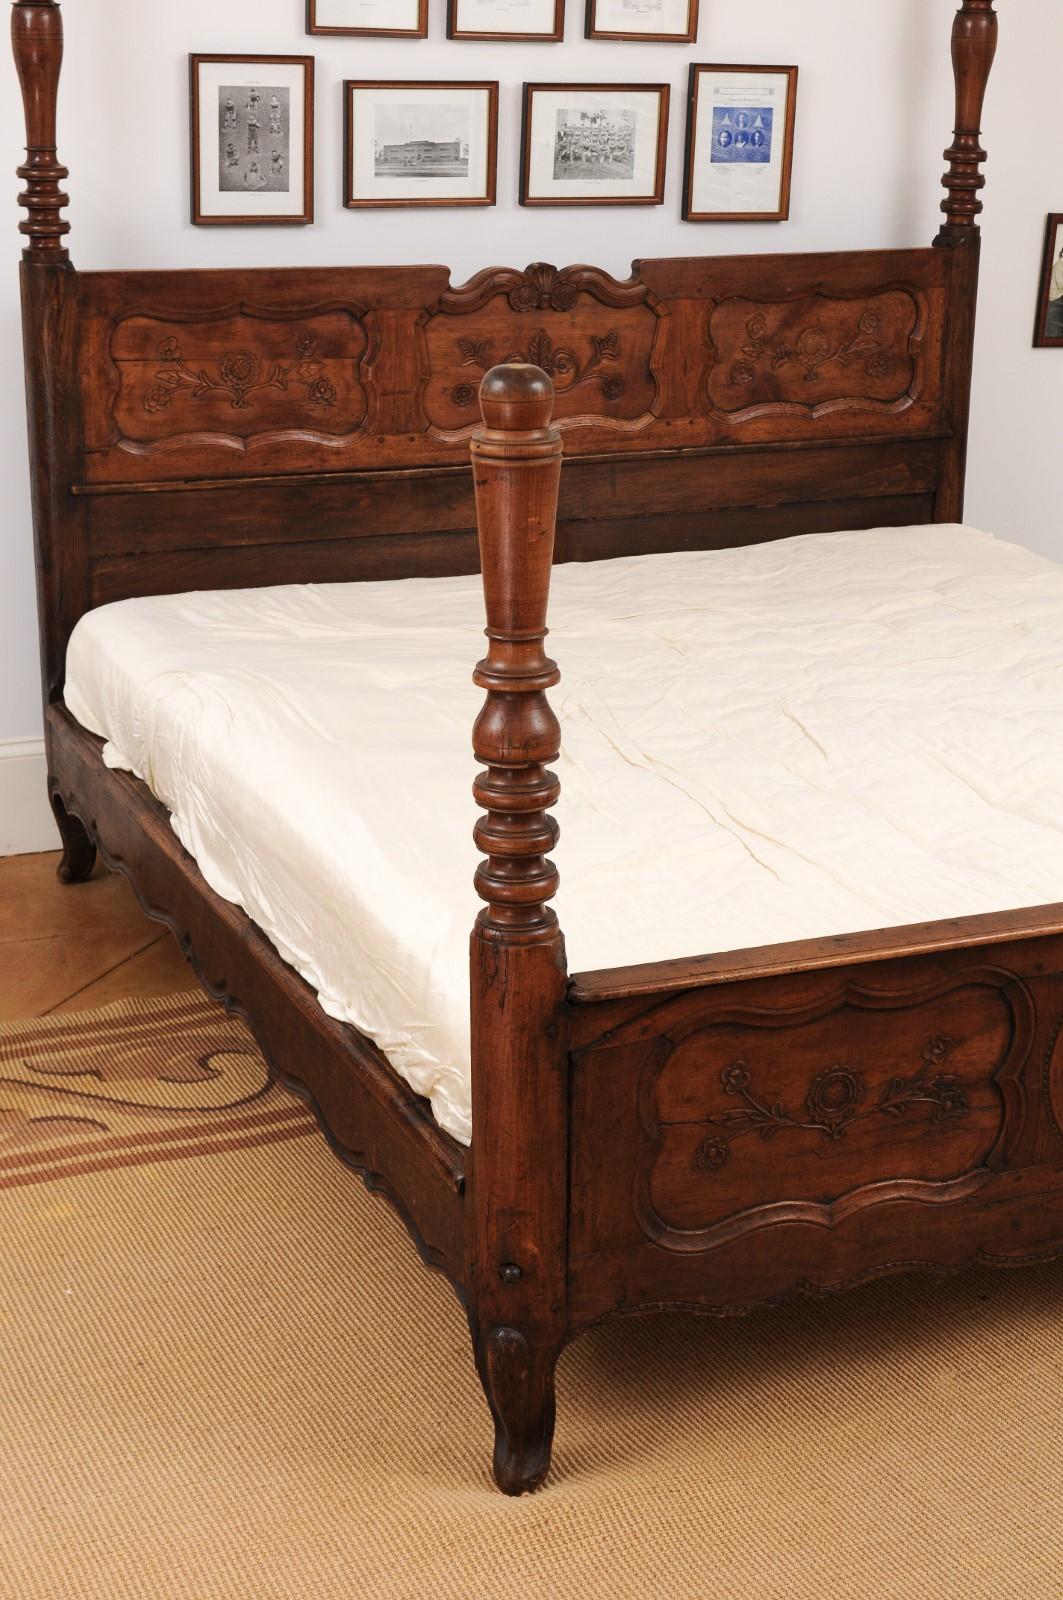 A French Napoléon III period walnut bed from the late 19th century, with carved floral motifs. Showcasing exceptional dimensions larger than a Queen size, this French walnut bed is offered with a custom mattress measuring 68